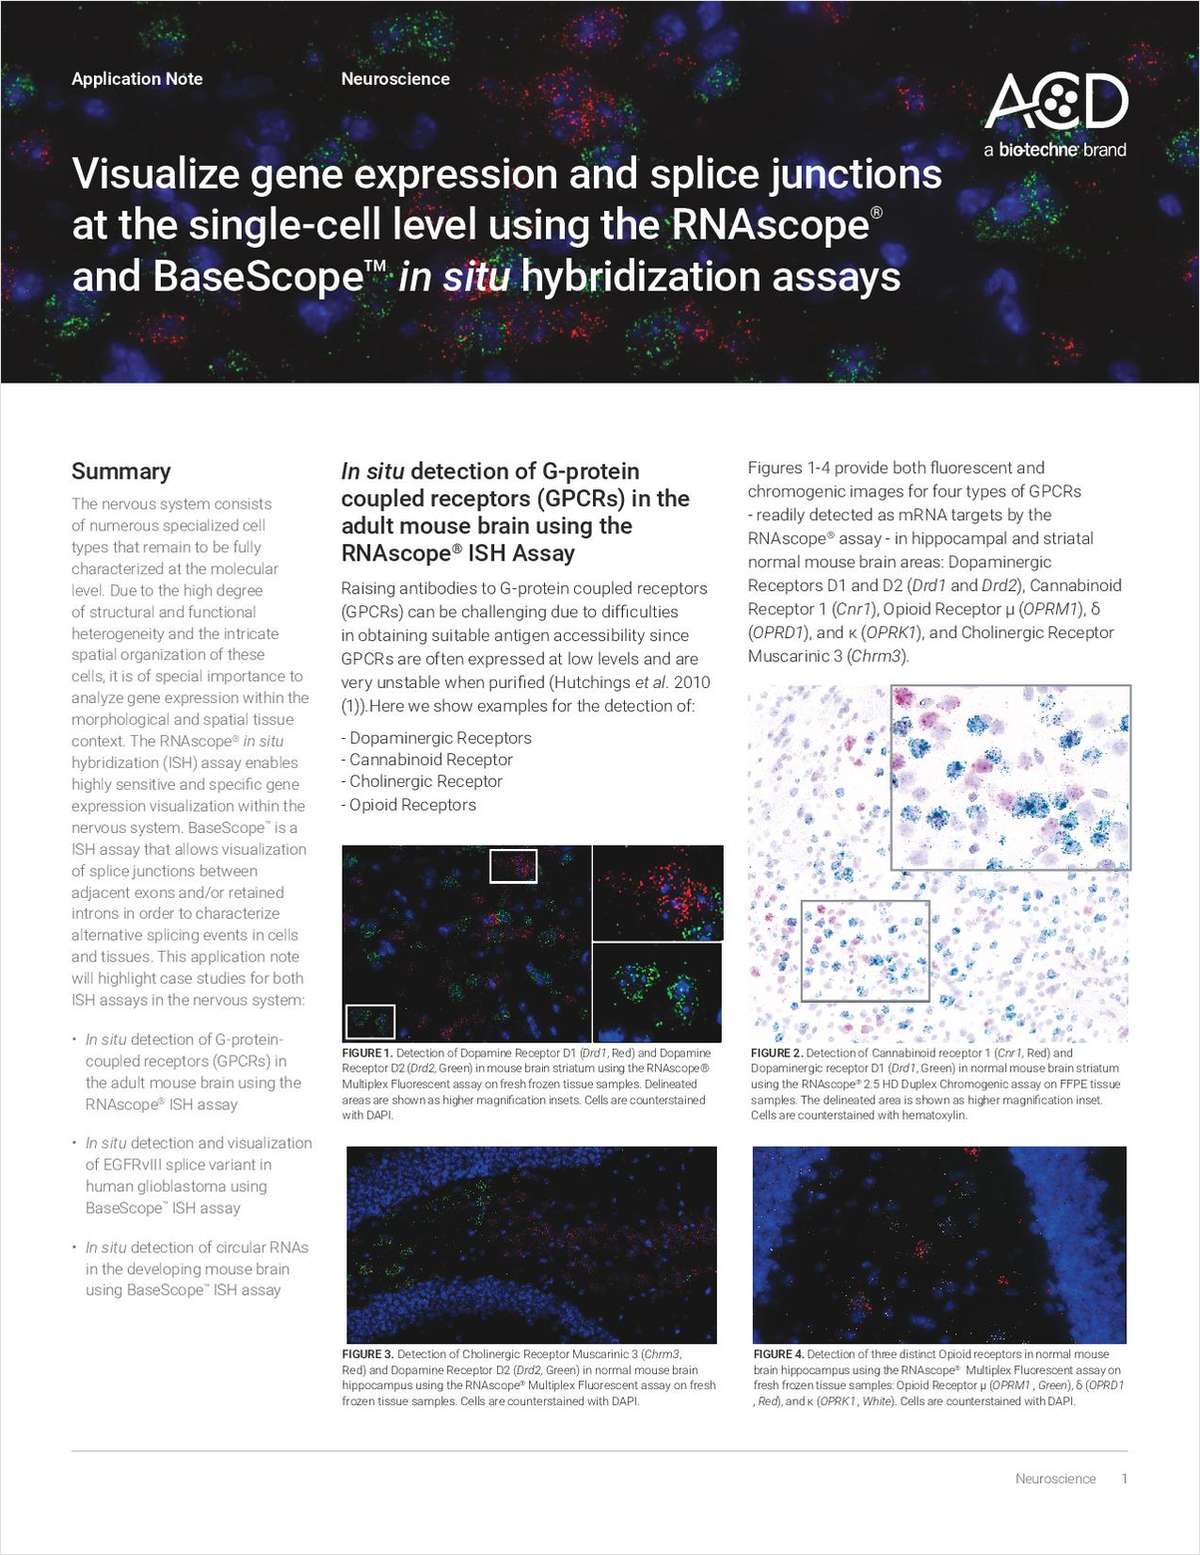 Visualize Gene Expression and Splice Junctions at the Single-Cell Level Using the RNAscope and BaseScope In Situ Hybridization Assays